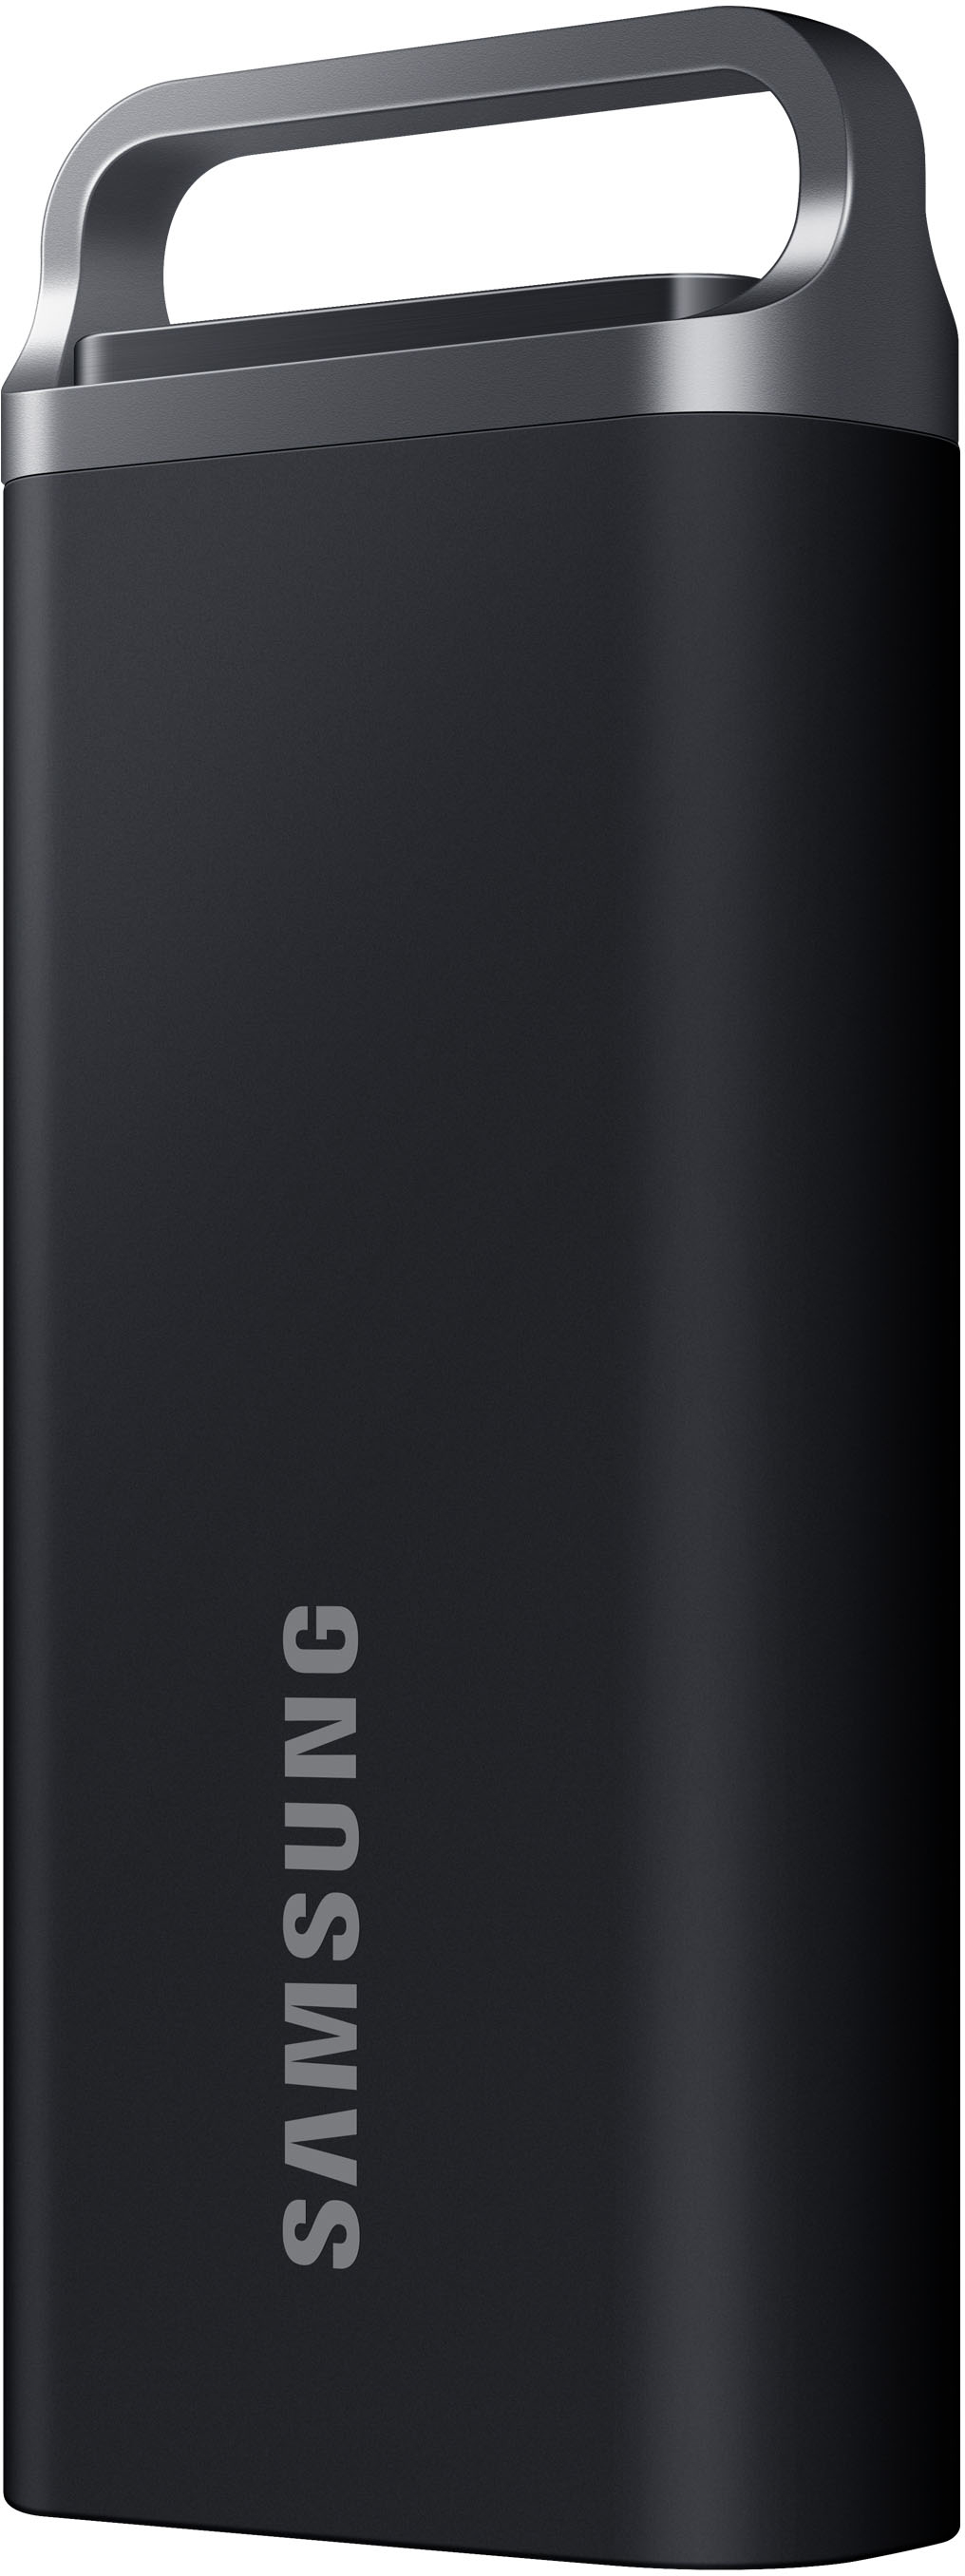  SAMSUNG T5 EVO Portable SSD 8TB, USB 3.2 Gen 1 External Solid  State Drive, Seq. Read Speeds Up to 460MB/s for Gaming and Content  Creation, MU-PH8T0S/AM, Black : Electronics